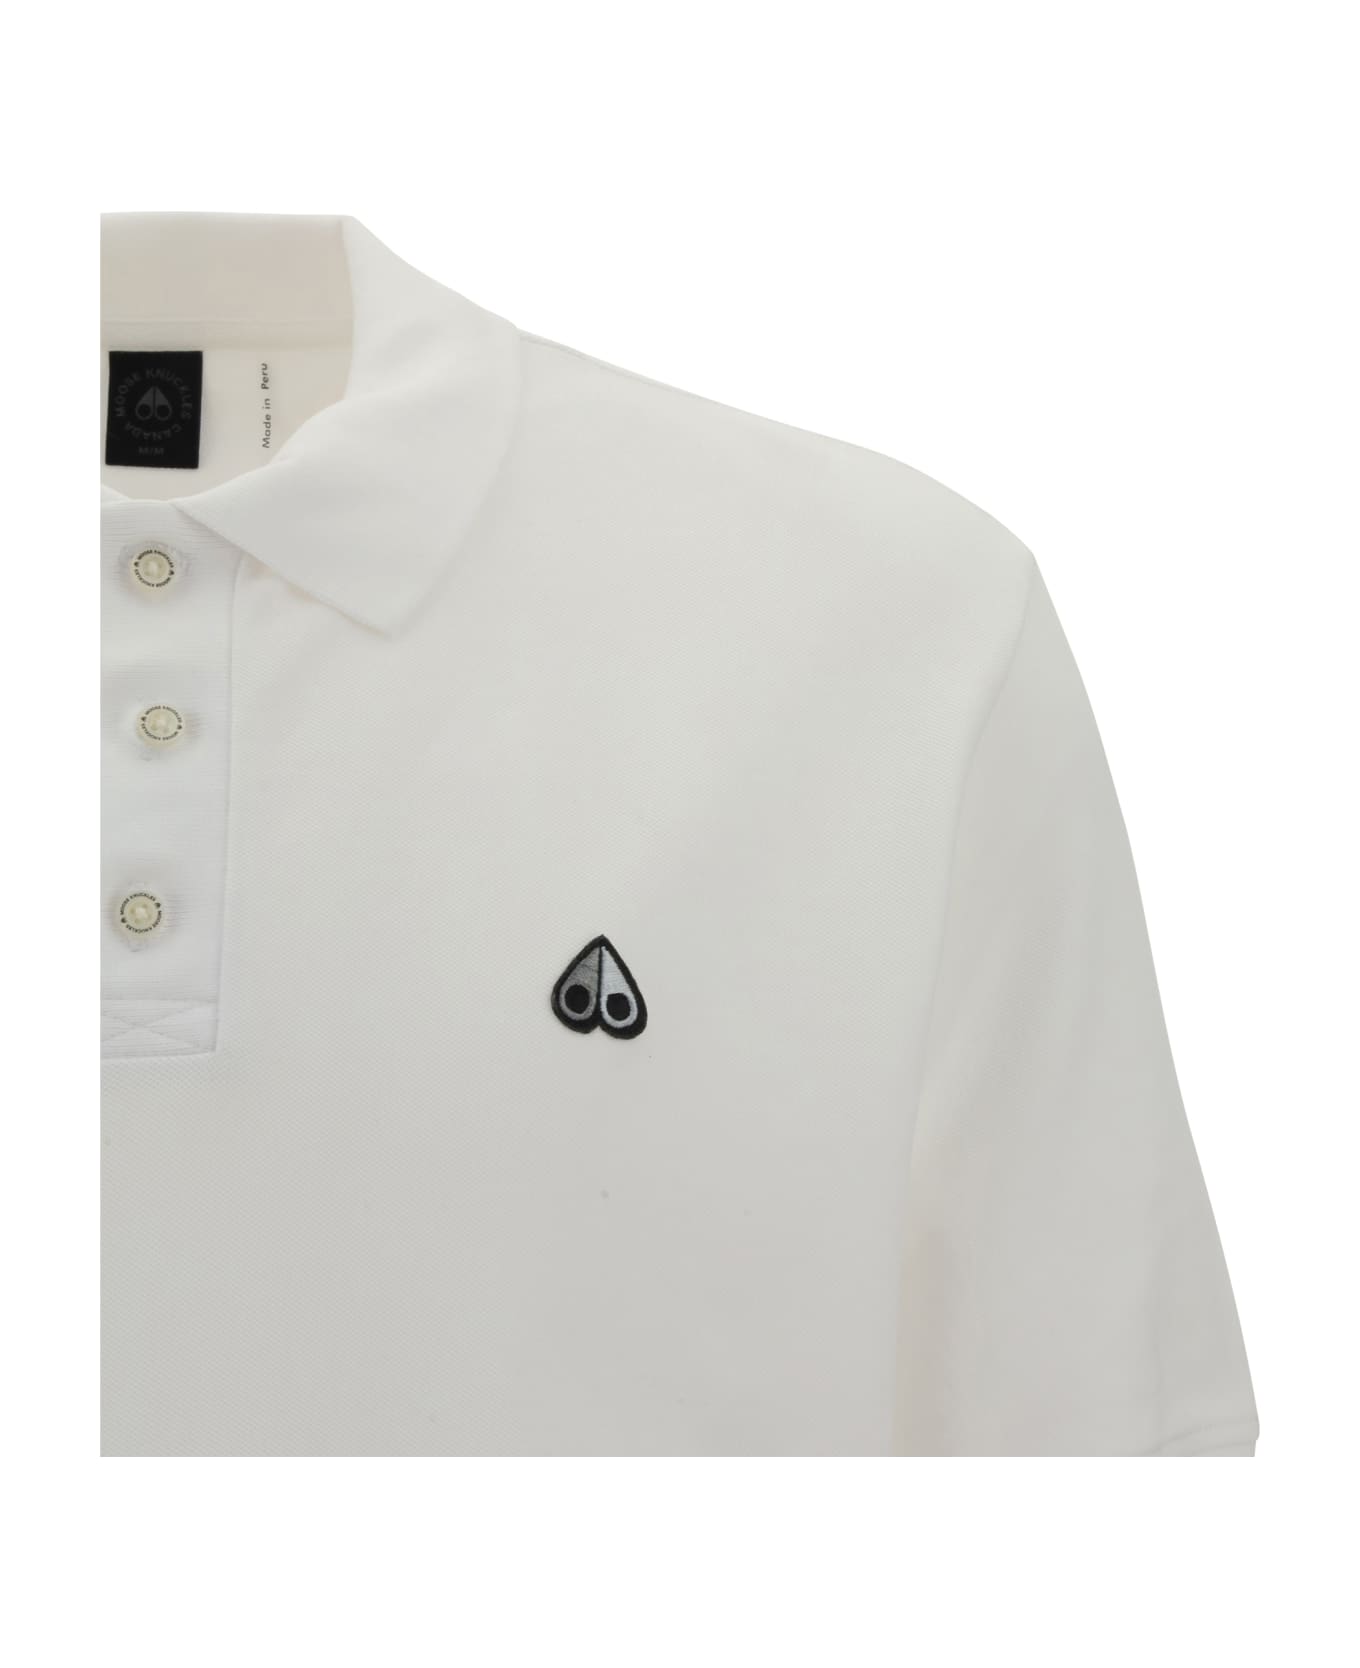 Moose Knuckles Polo Shirt - White ポロシャツ